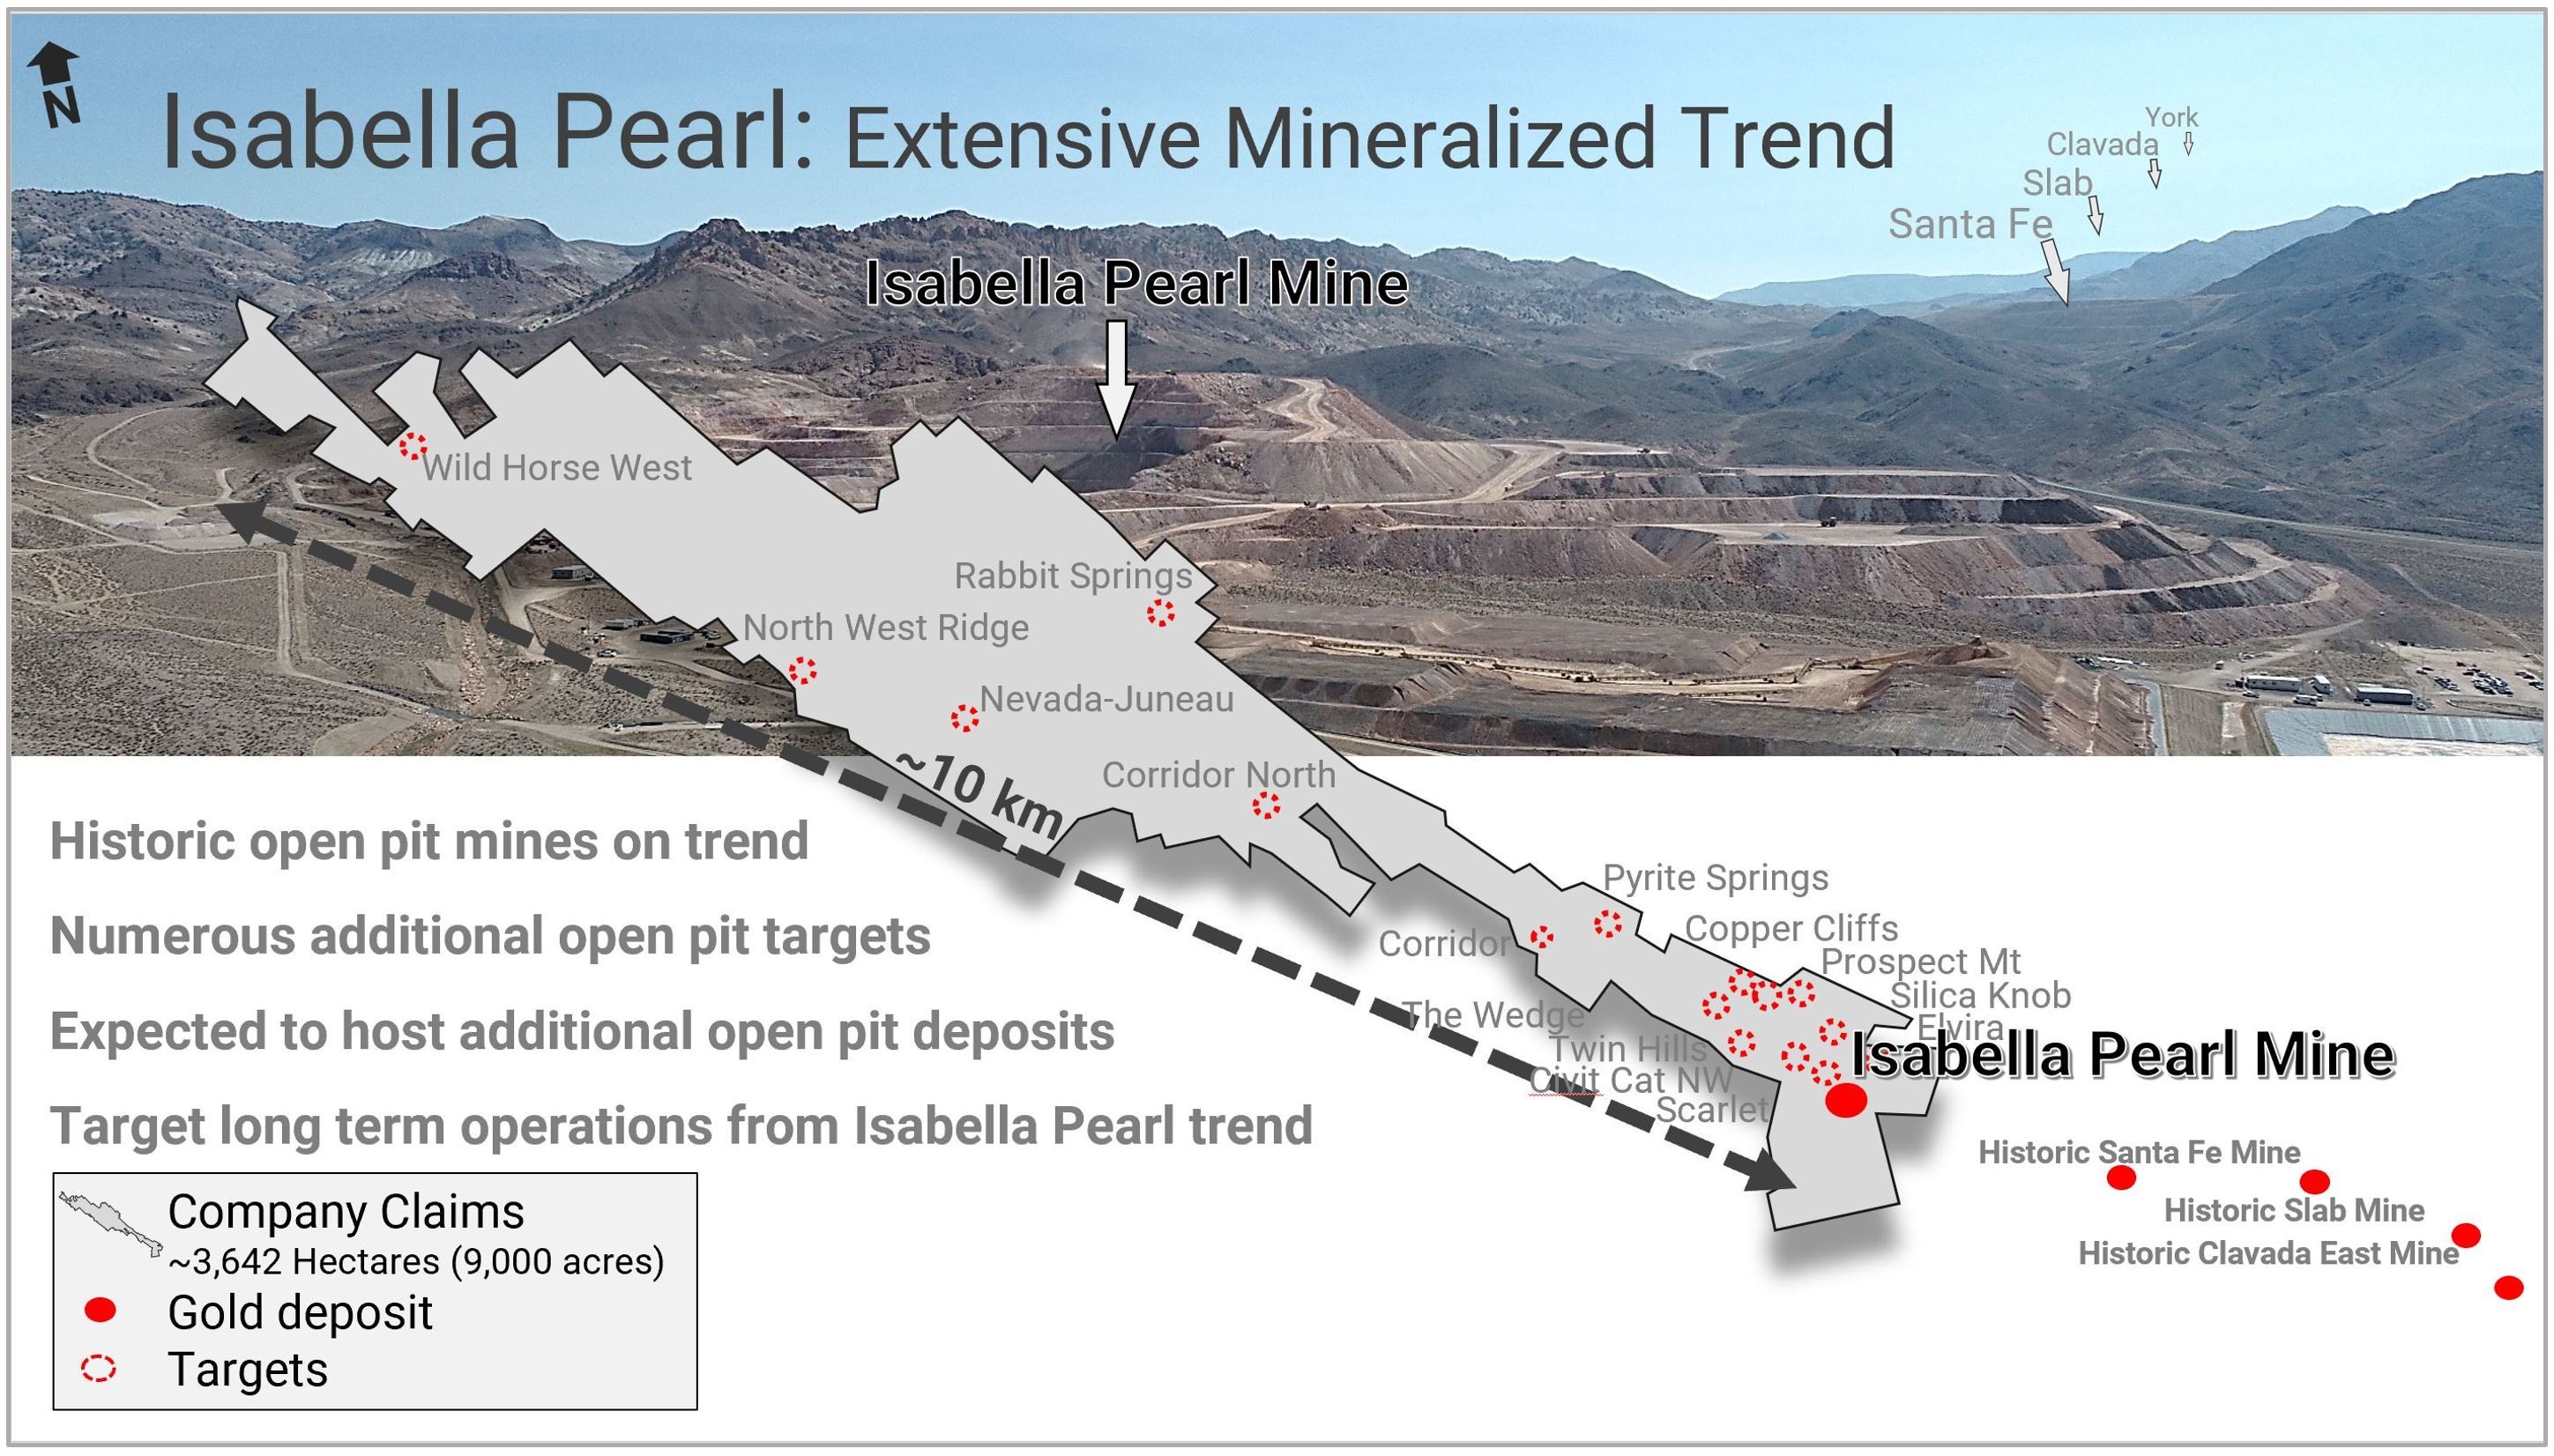 Isabella Pearl - Extensive Mineralized Trend